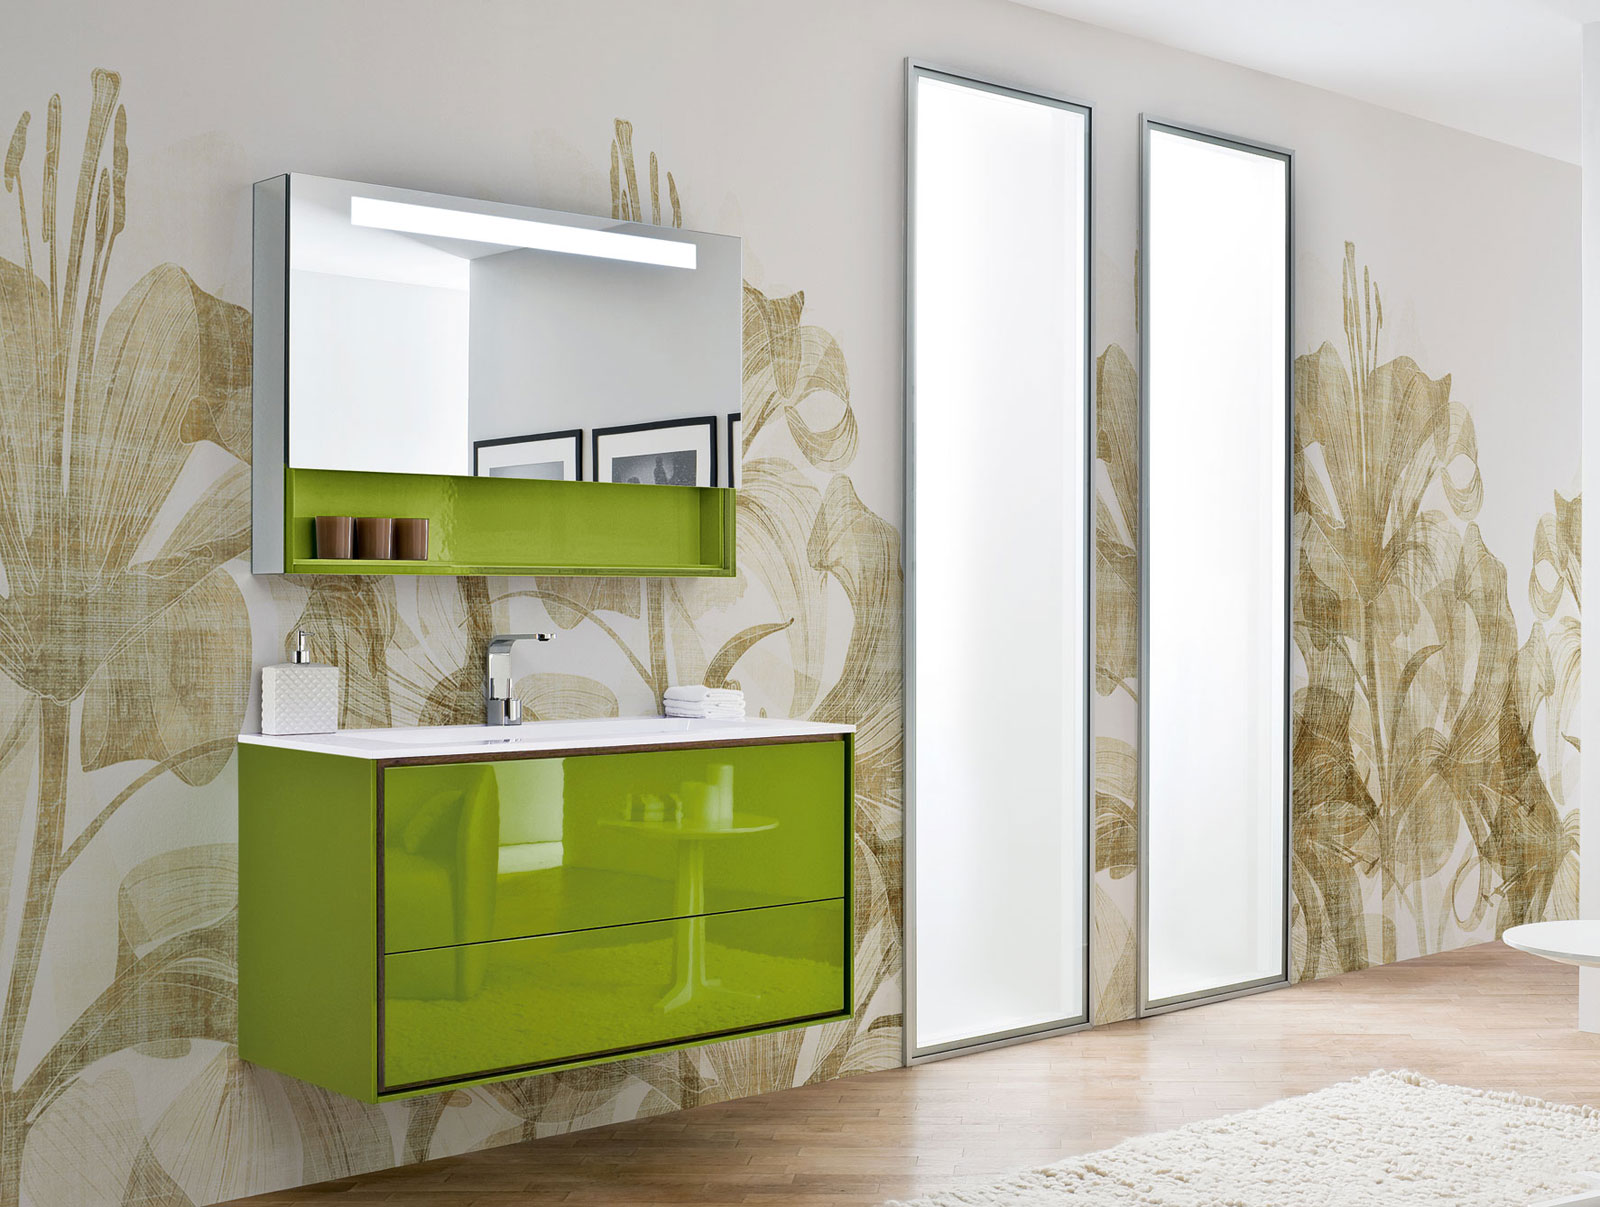 Modern Bathroom Design Stunning Modern Bathroom With Minimalist Design Applying Flowers Wall Painting Decorations Completed With Bathroom Vanity Cabinets In Green Color And Furnished With Mirror Bathroom 15 Bathroom Vanity Cabinets For Your Captivating Home